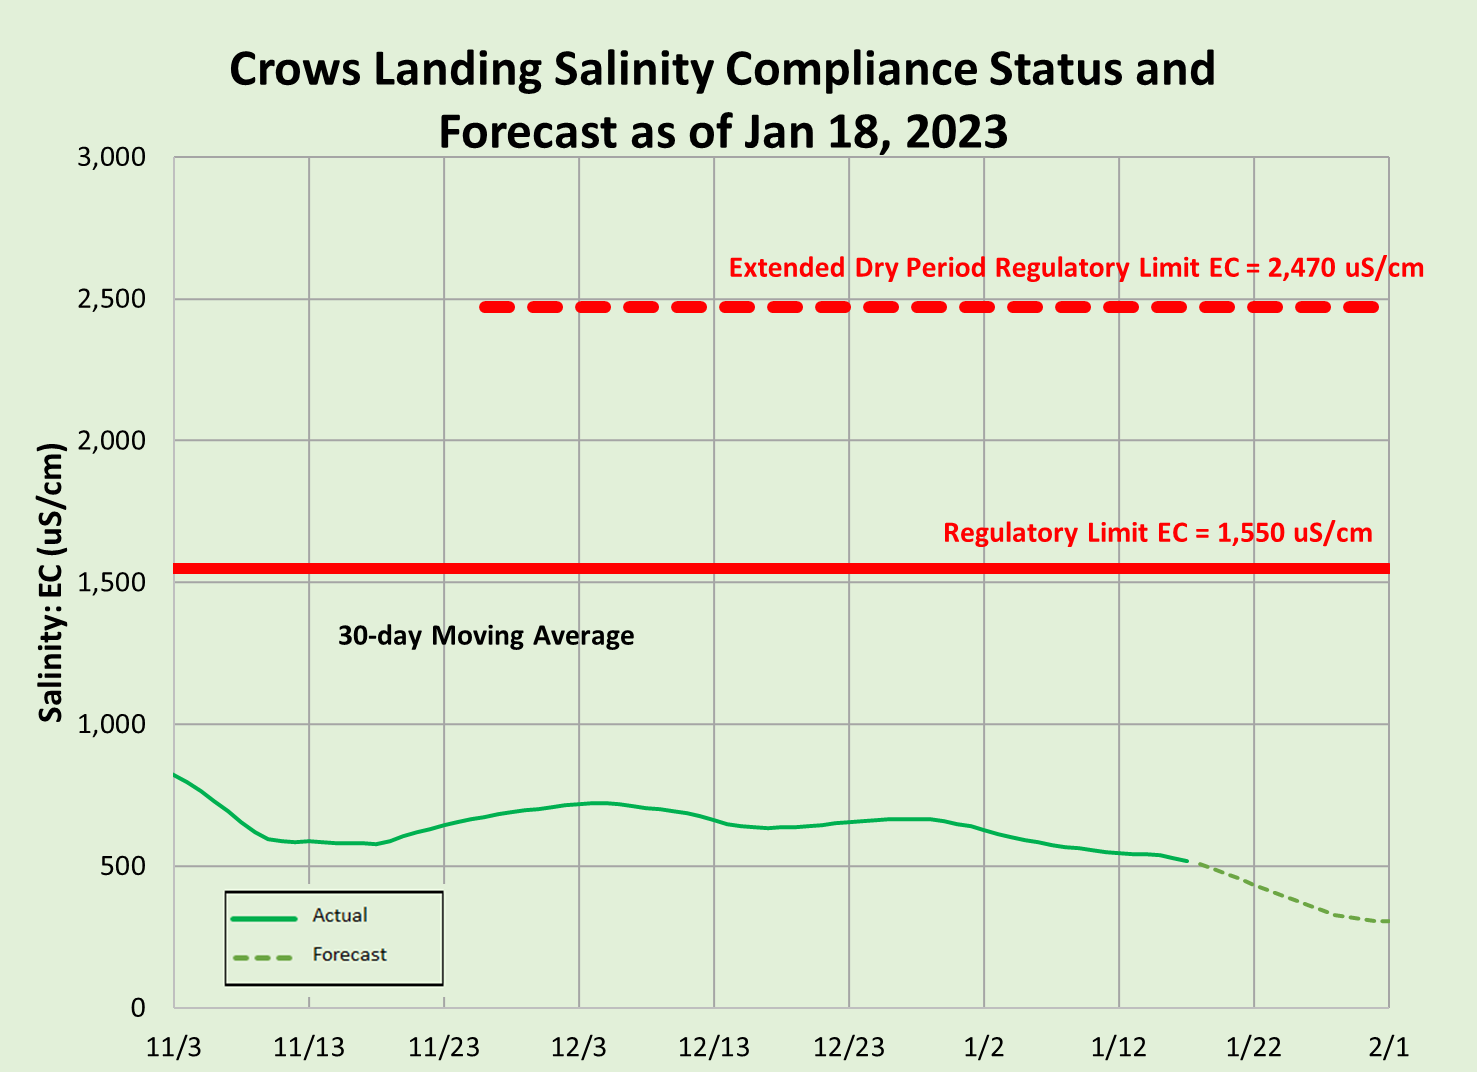 crows landing salinity compliance status and forecast for more information contact Public Affairs Office